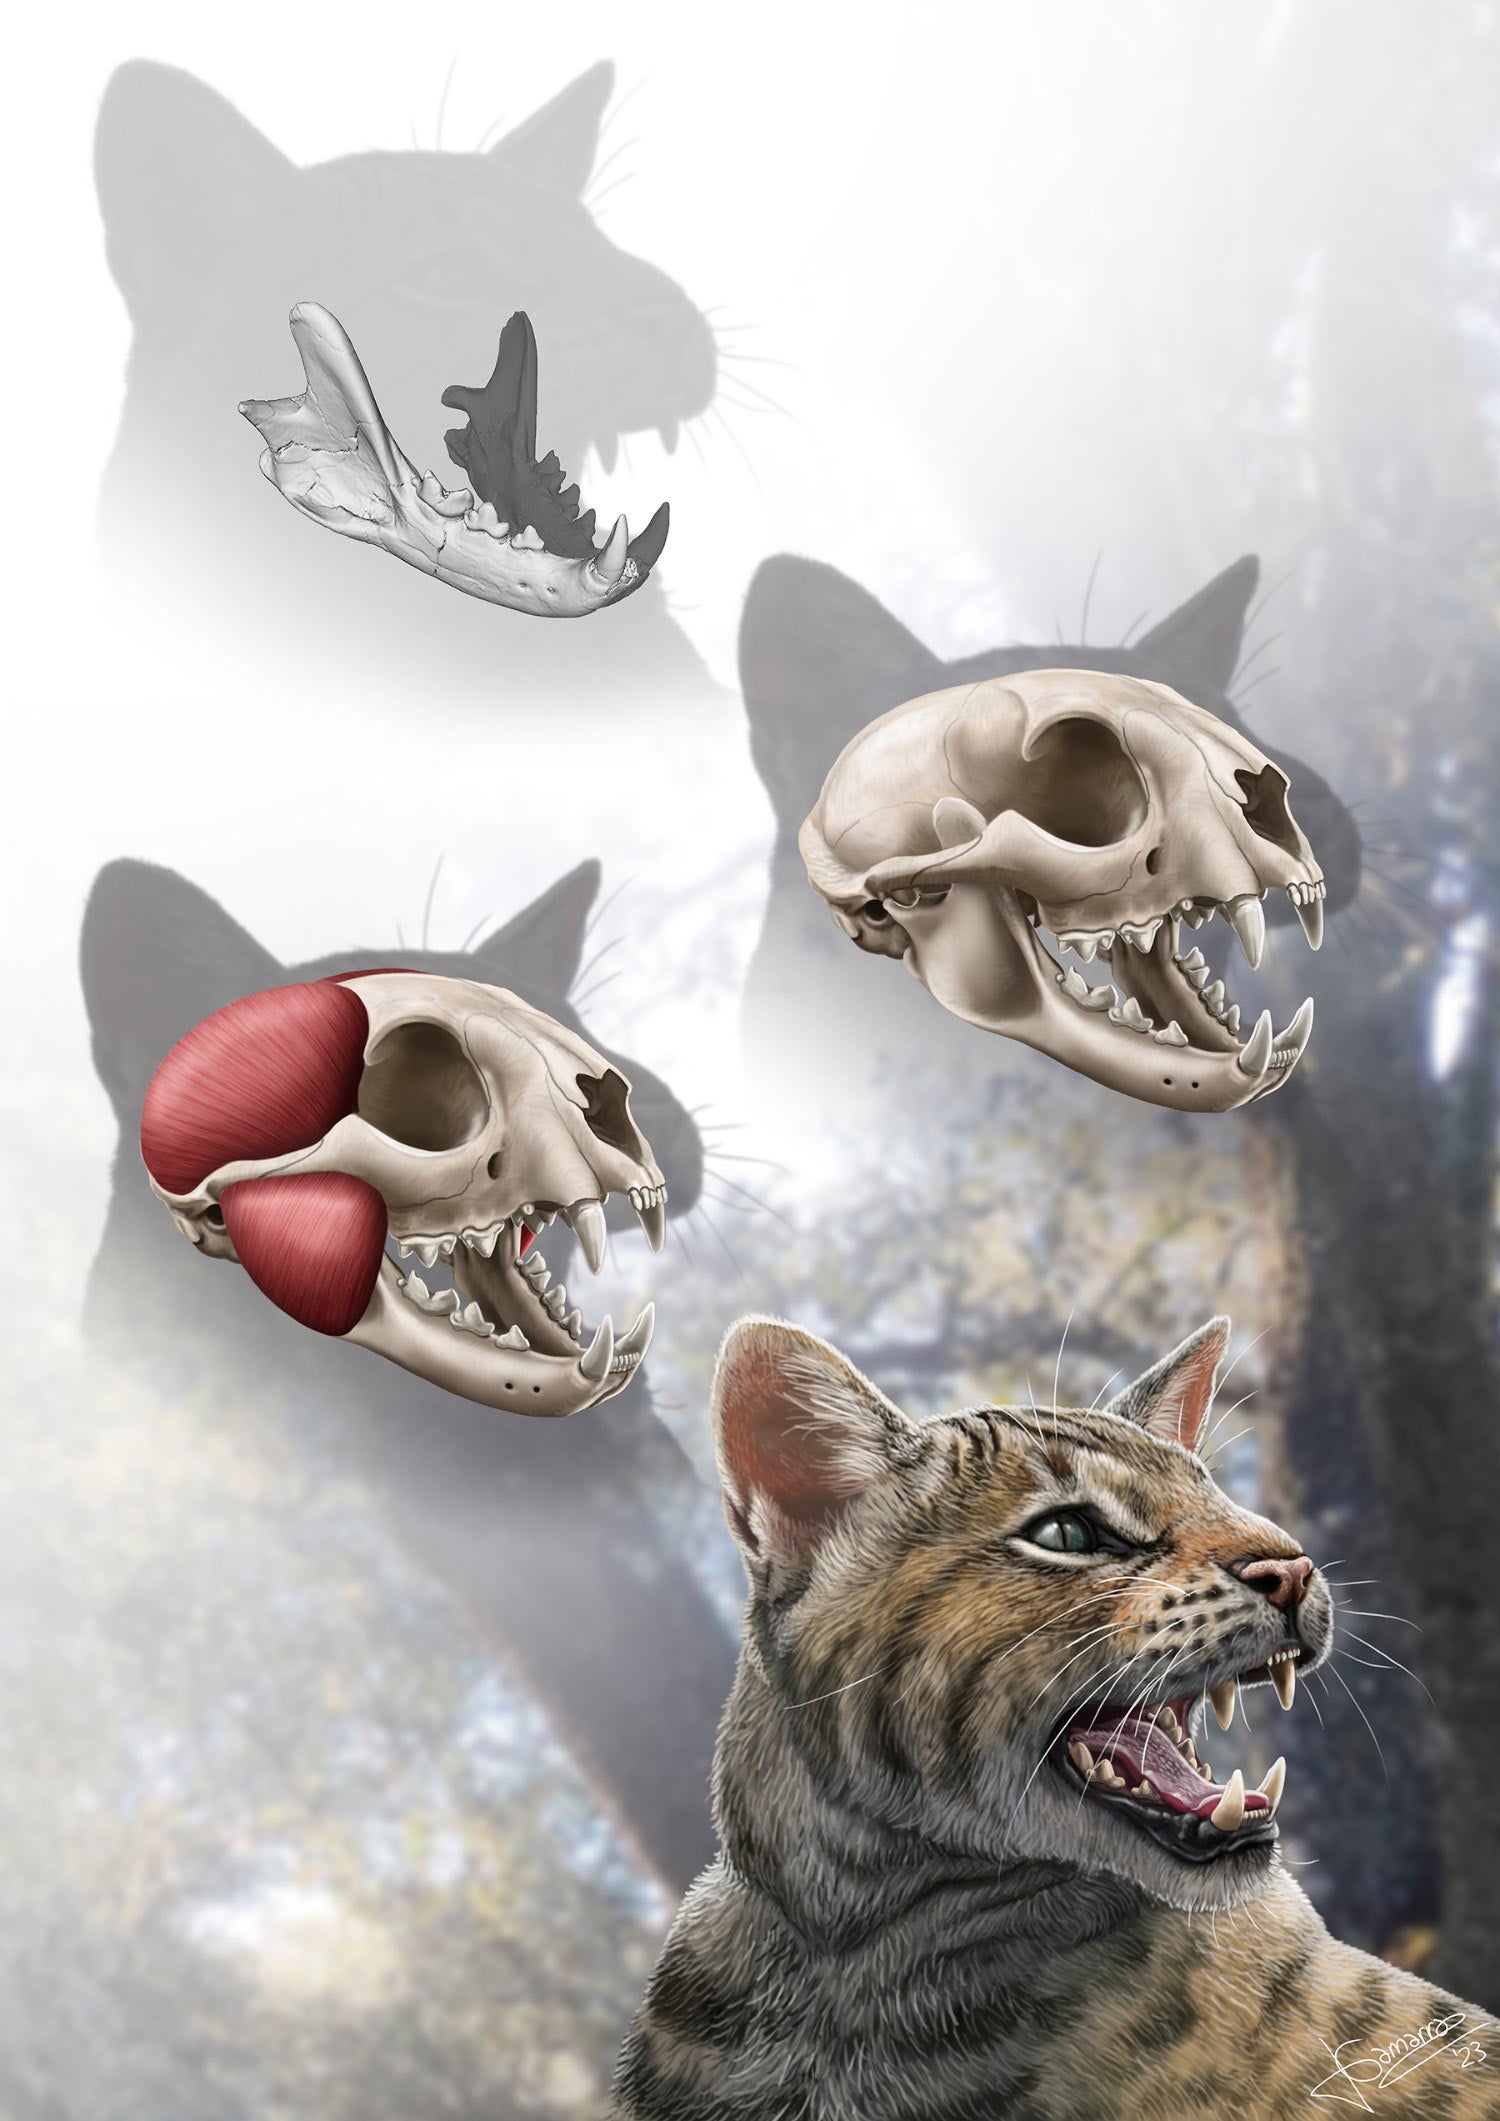 Reconstruction of the mandible, skull, masticatory muscles, and life appearance of Magerifelis peignei